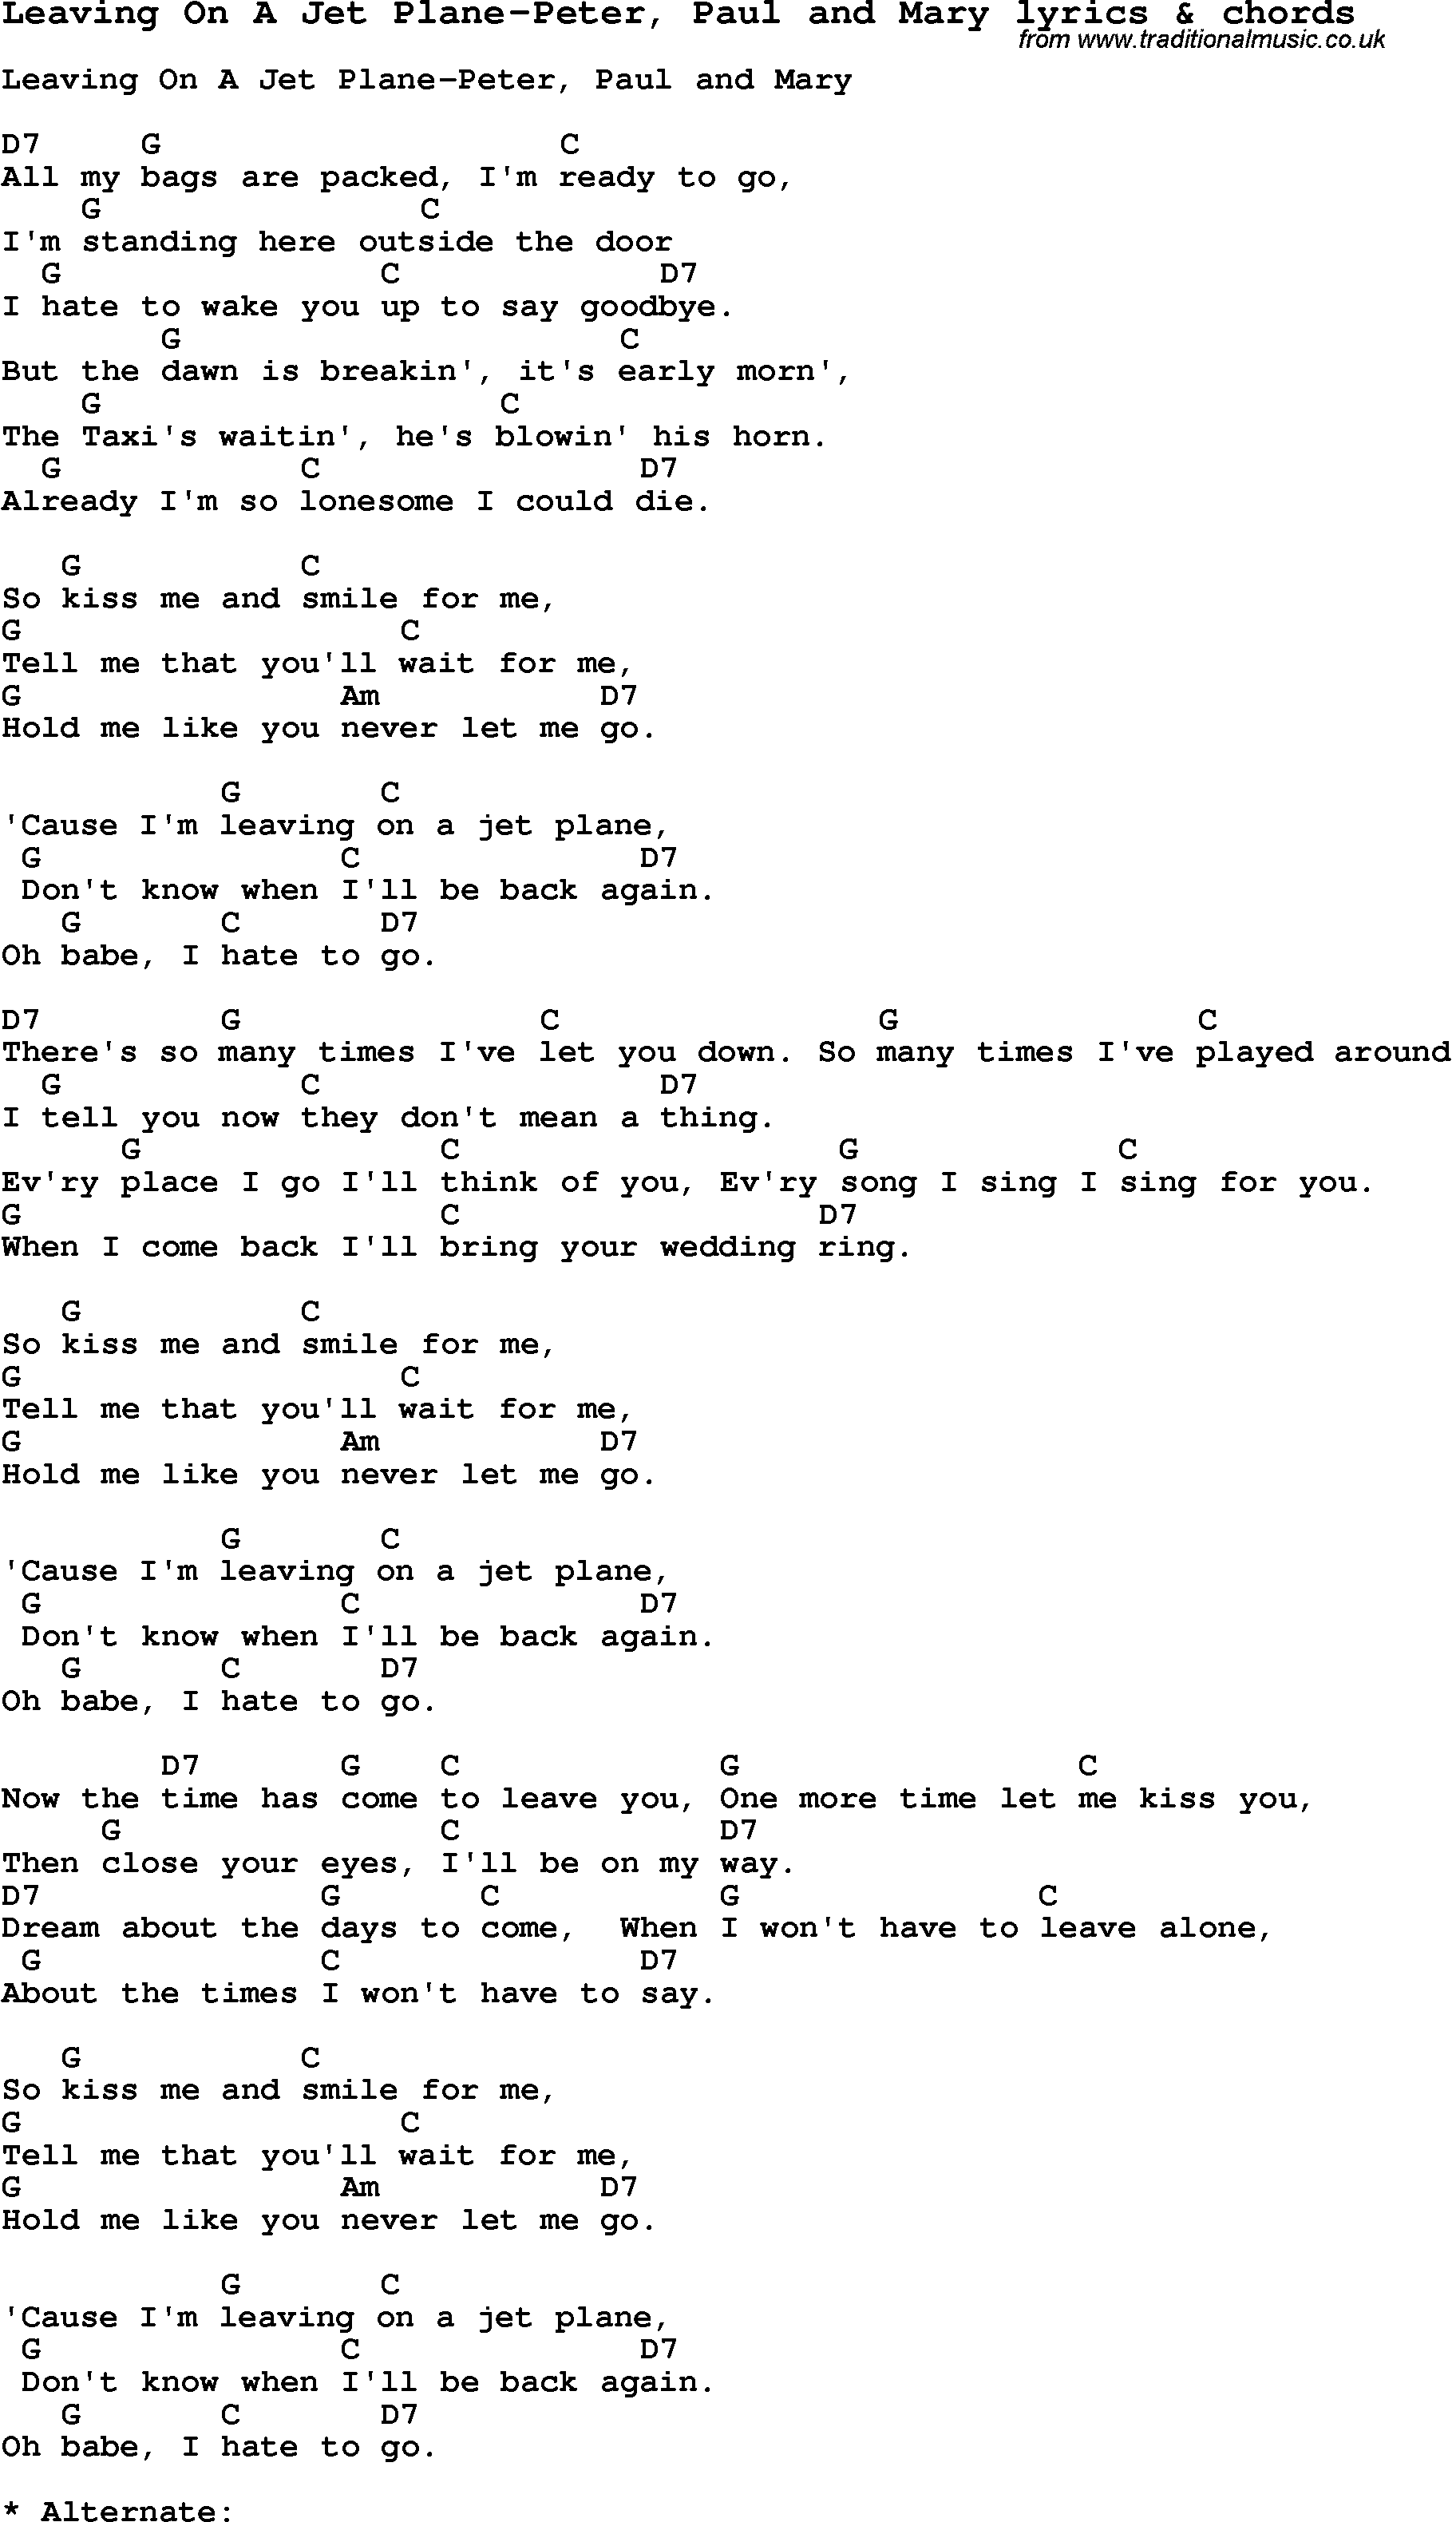 Love Song Lyrics for: Leaving On A Jet Plane-Peter, Paul and Mary with chords for Ukulele, Guitar Banjo etc.